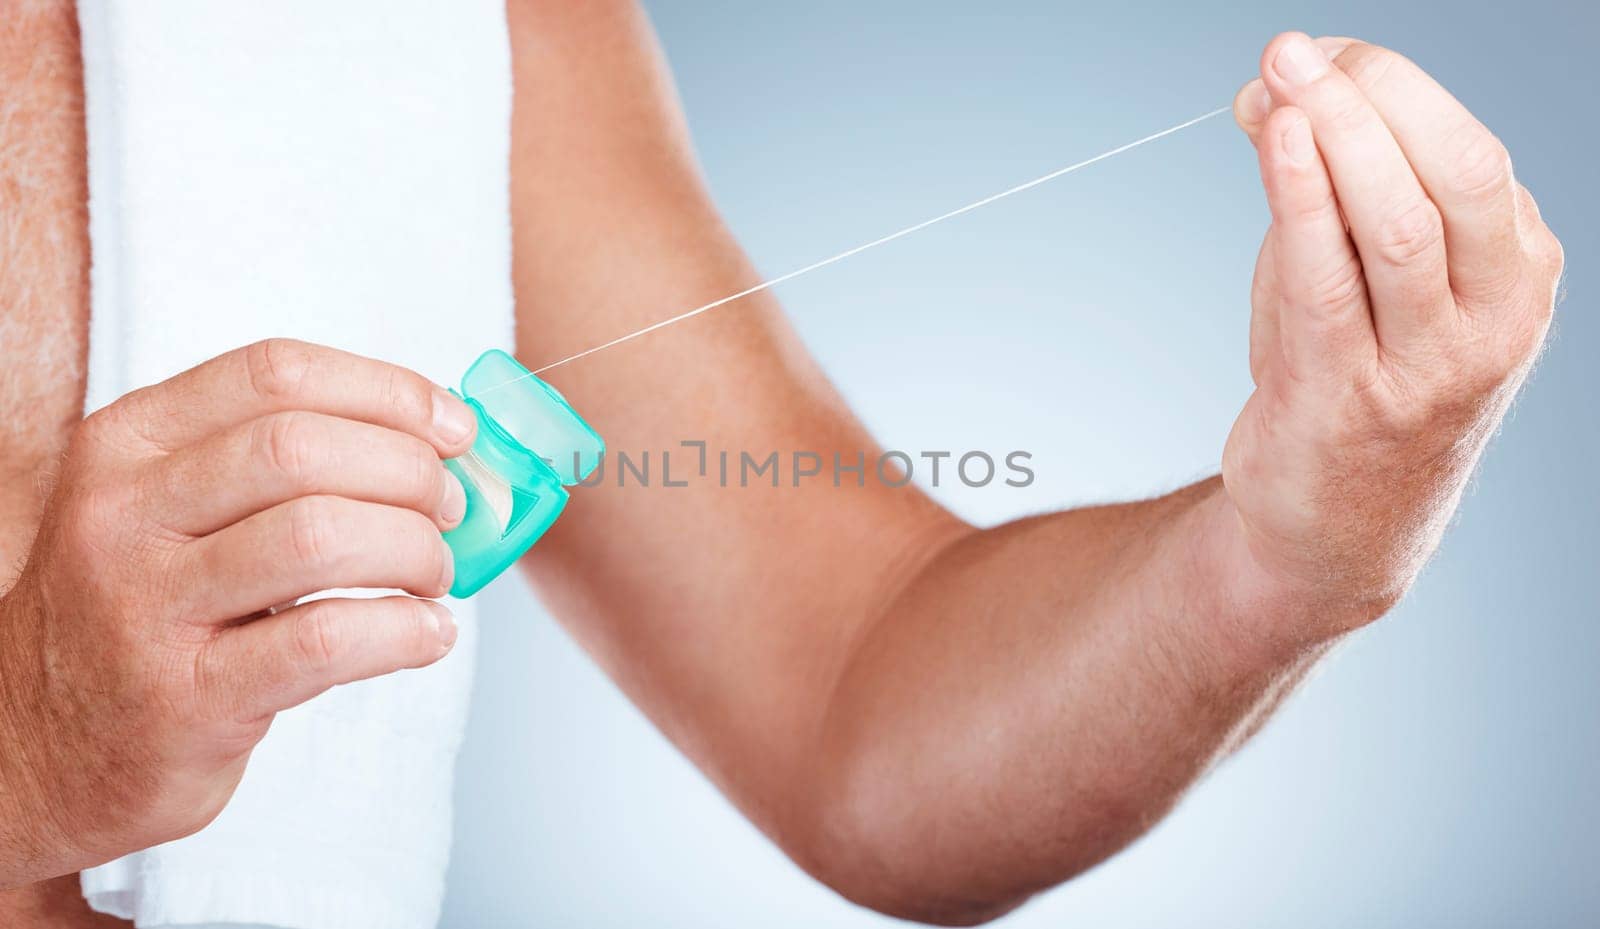 Hands, dental and floss product in studio isolated on a blue background for oral hygiene. Health, wellness and senior man model holding container with thread for flossing, cleaning and teeth care